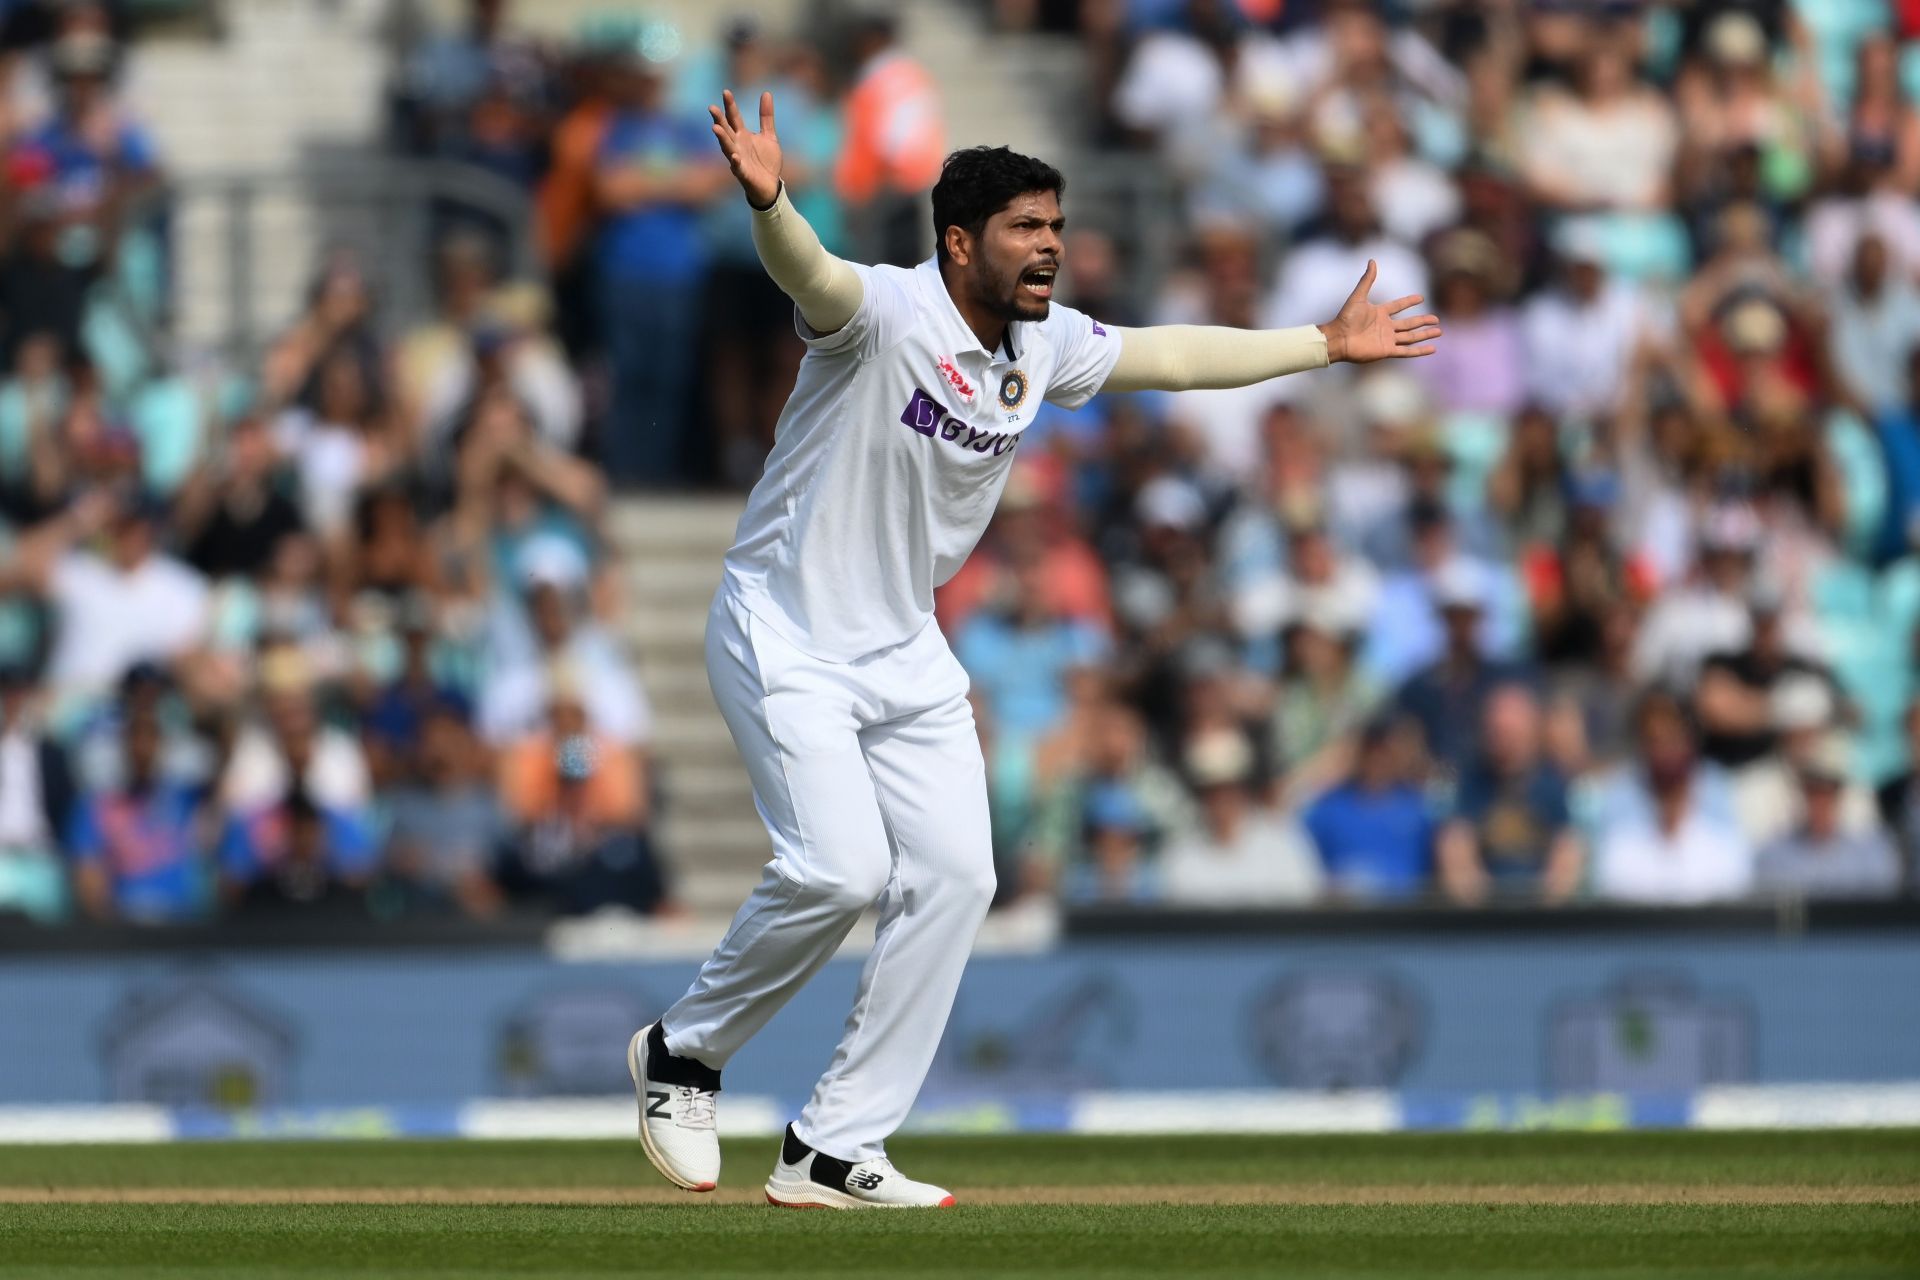 Umesh Yadav has made brief appearances in the last two Test series for India